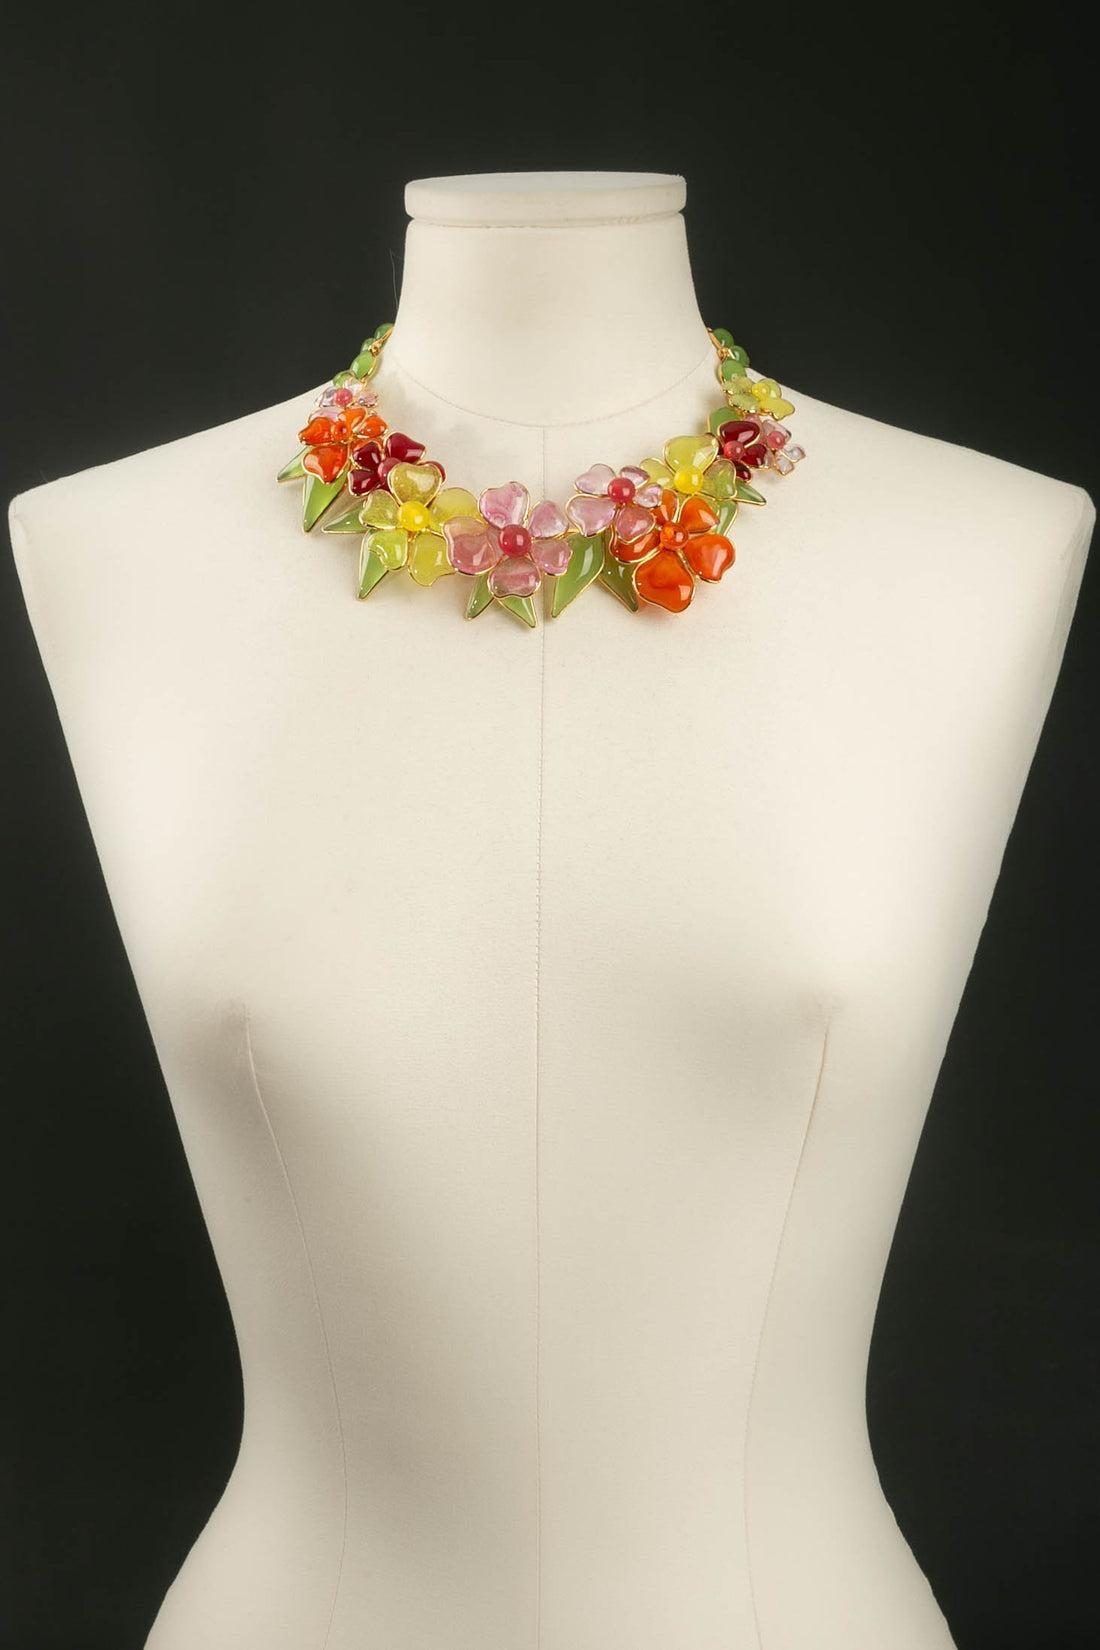 Augustine : Short gilded metal necklace decorated with multicolor glass paste flowers. Signed on the clasp.

Additional information: 
Dimensions: Length: 40 cm to 46.5 cm (15.74